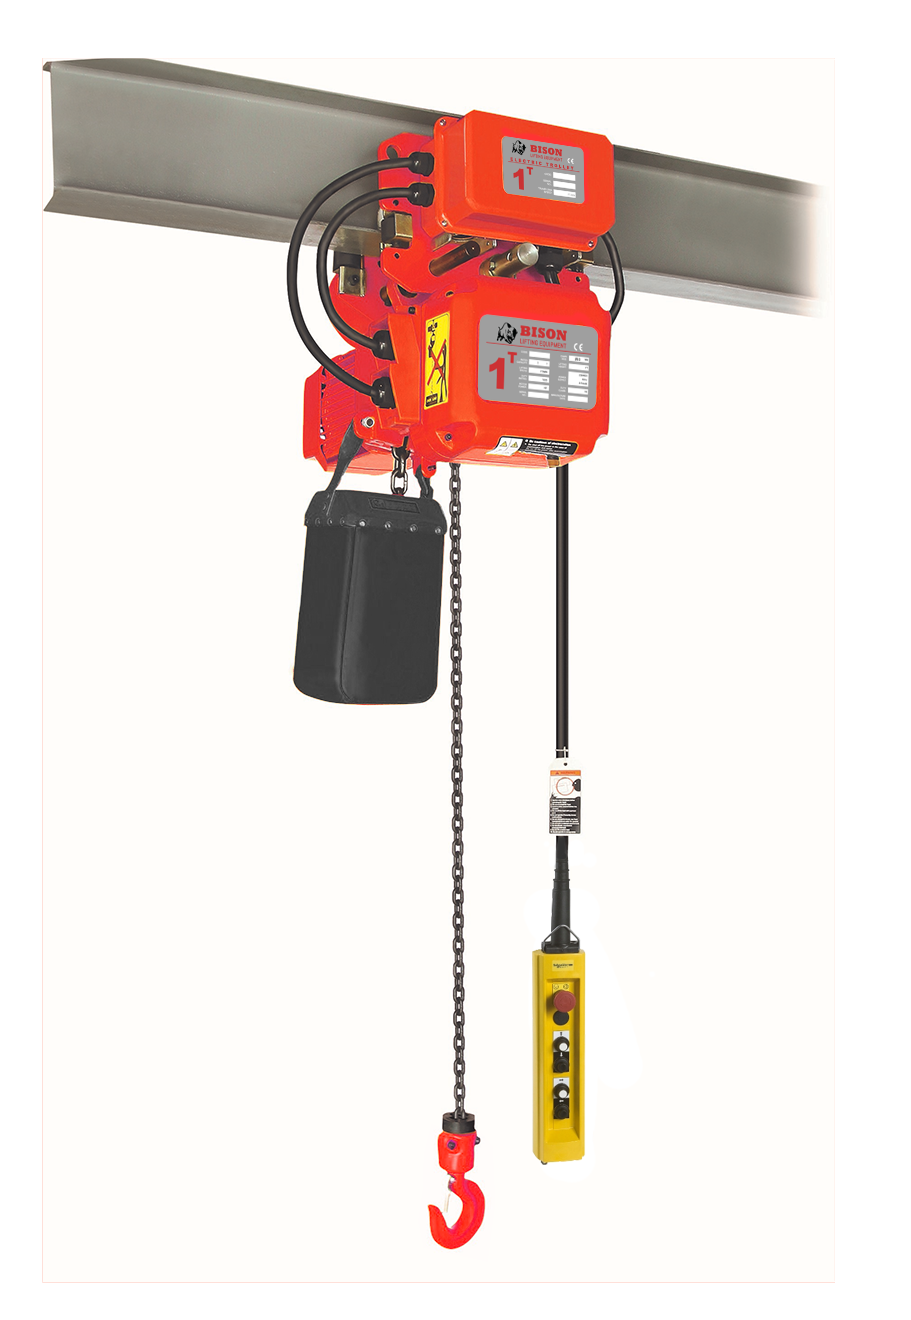 Bison Lifting HHBDSK01-01D-WPC01D 1 Ton 3 Phase Dual Speed Electric Chain Hoist with Trolley - 20ft of Lift 3-Ph 230V/460V HHBDSK01-01D-WPC01D